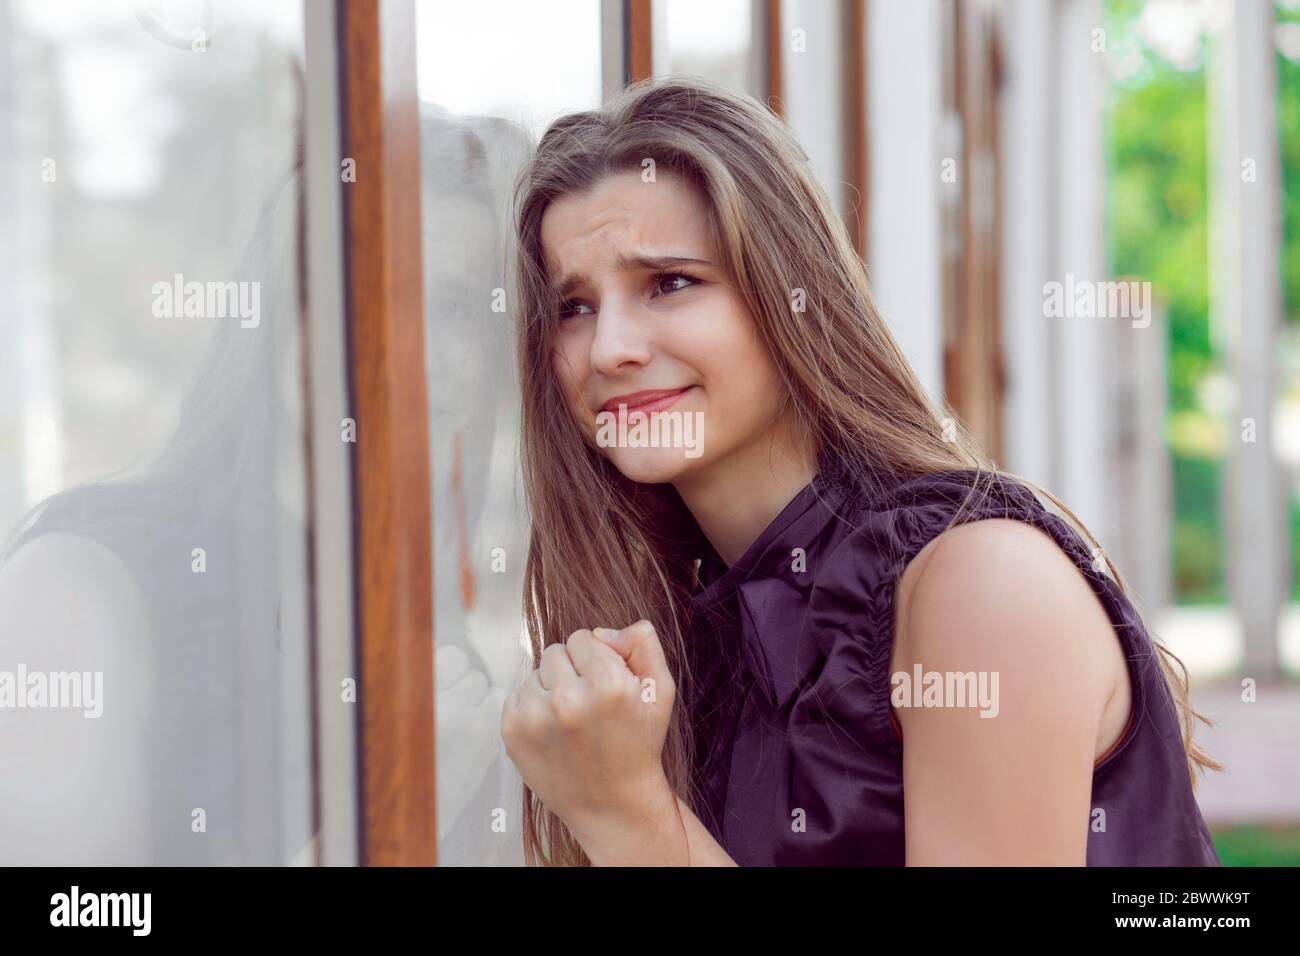 Upset outside in the city. Beautiful young woman with stressed about to cry near her office store window fist on glass crying. Negative human emotions Stock Photo